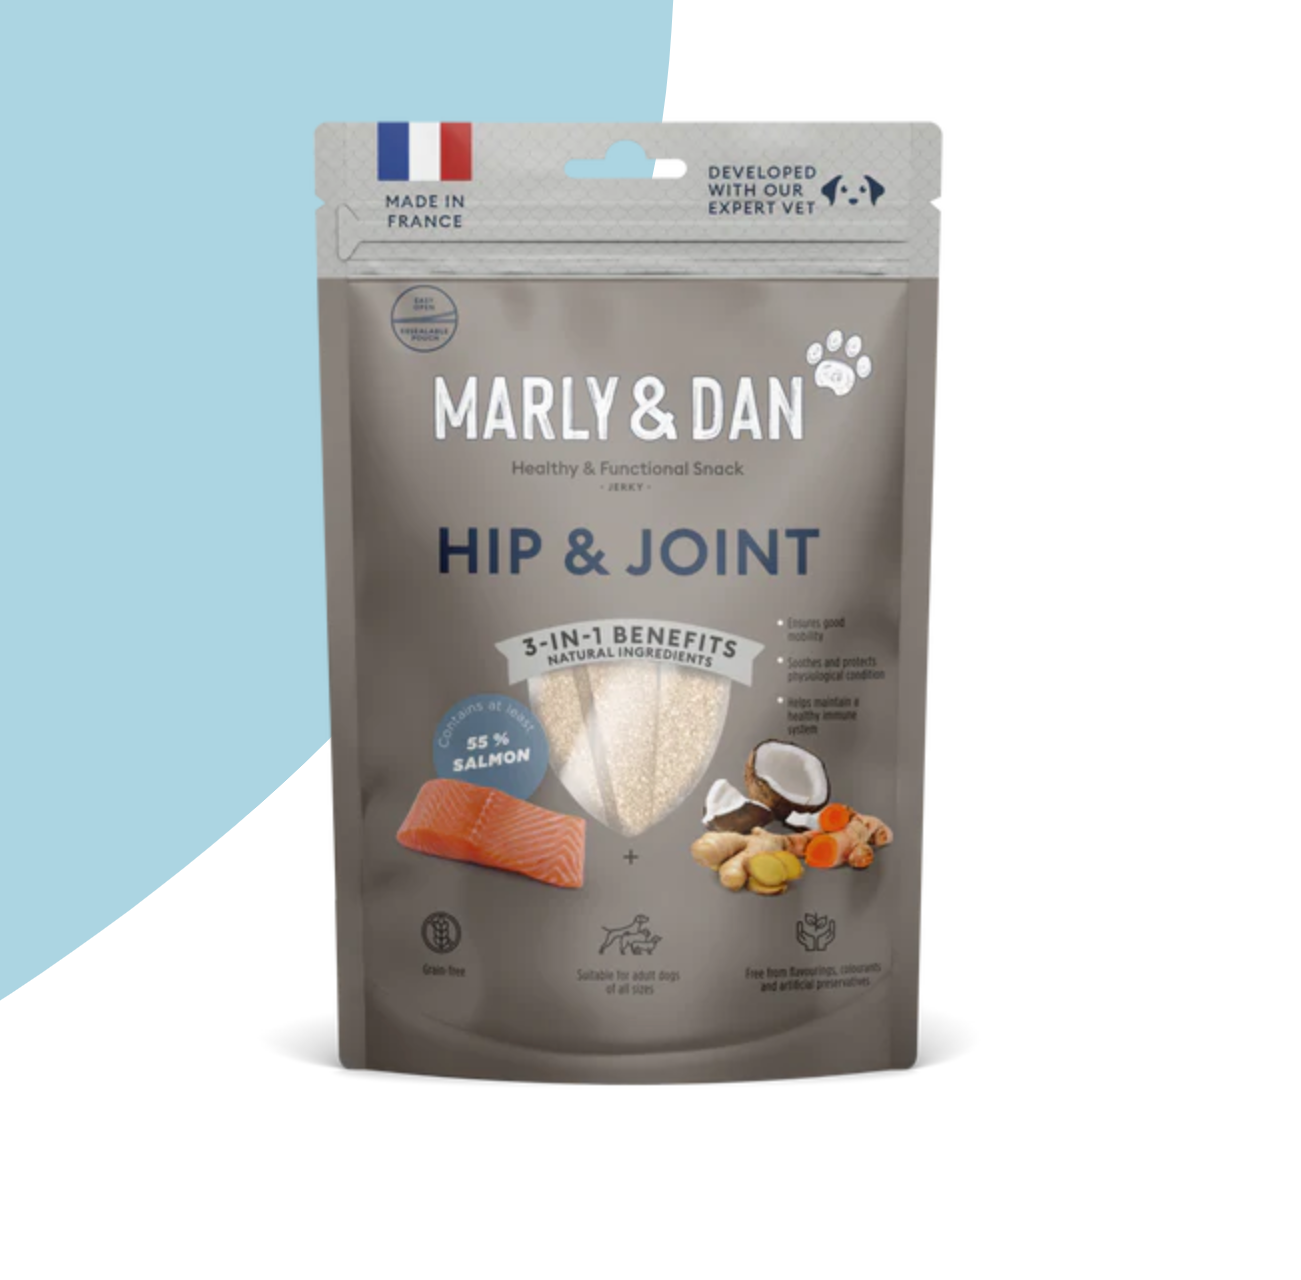 Marly & Dan Hip & Joint